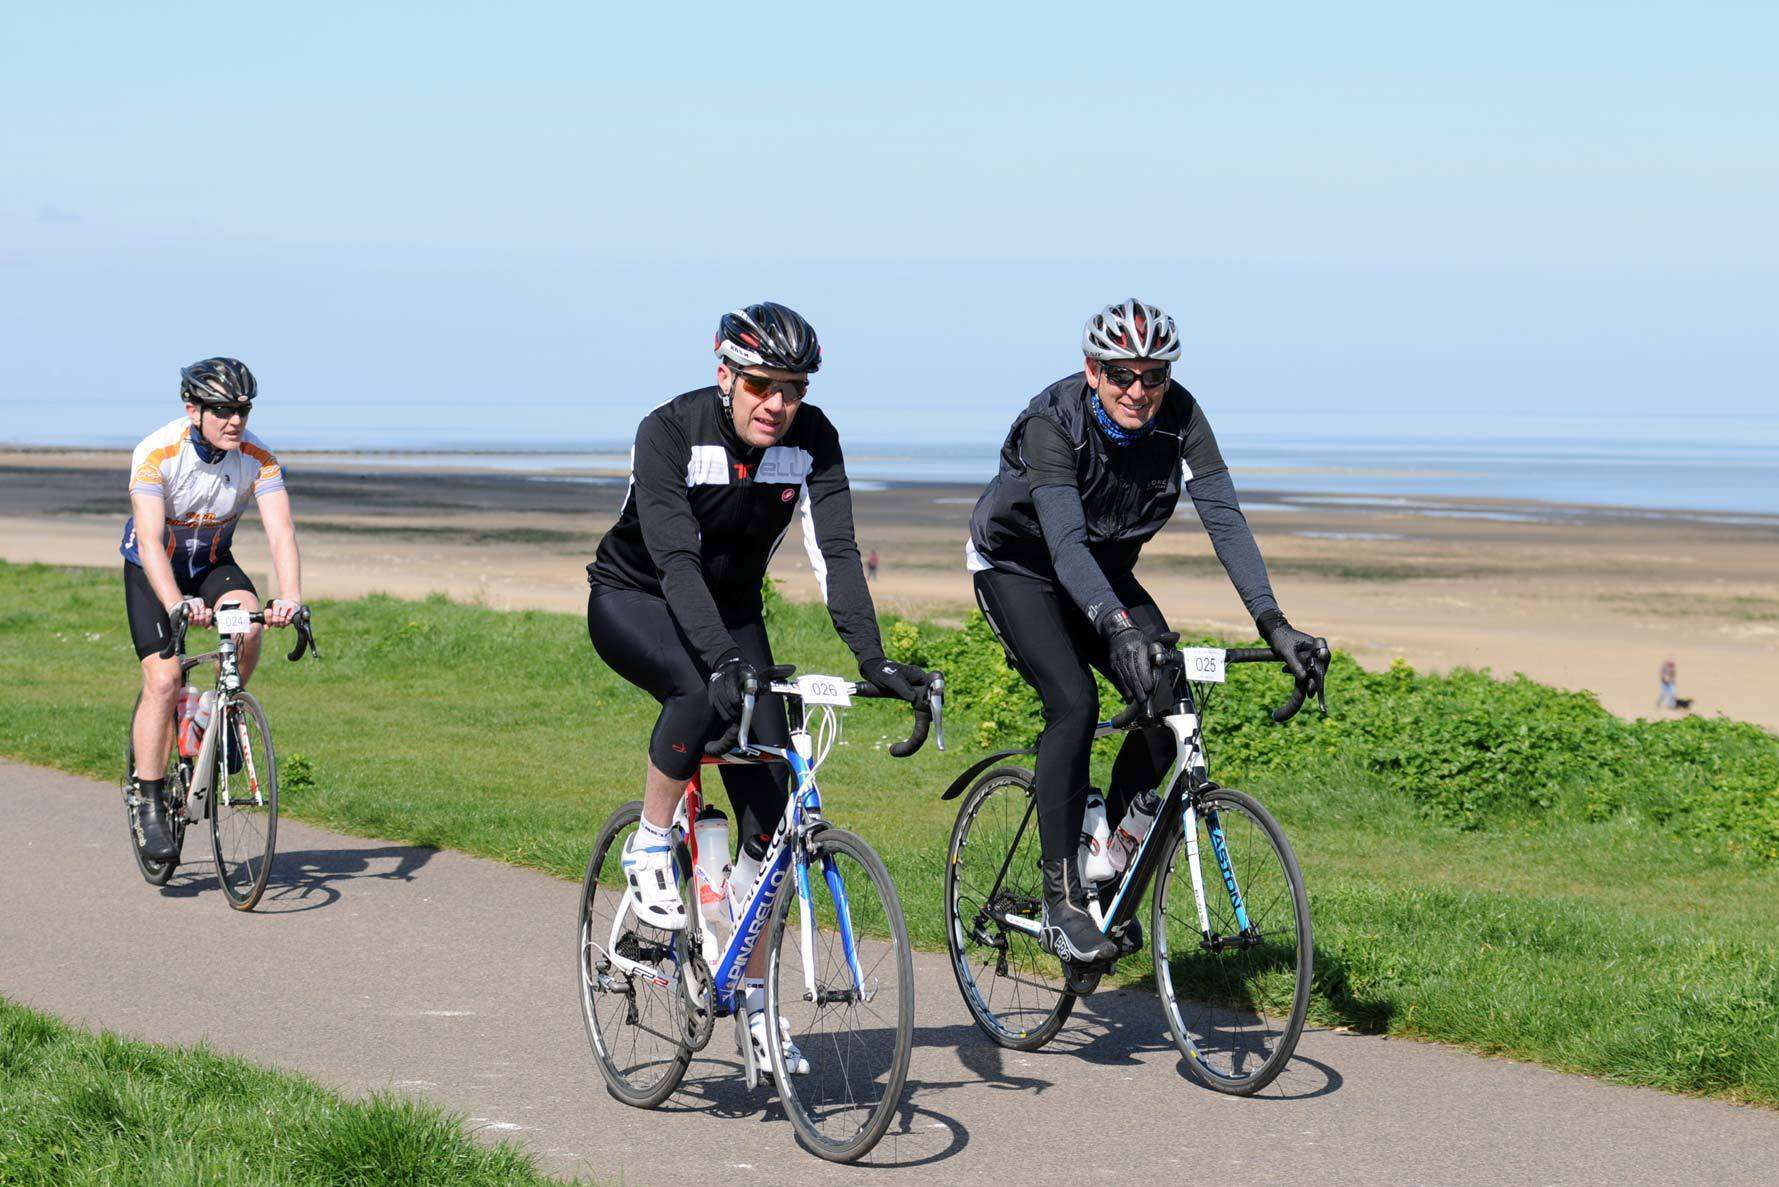 The KM Big Bike Ride starts in Whitstable this year